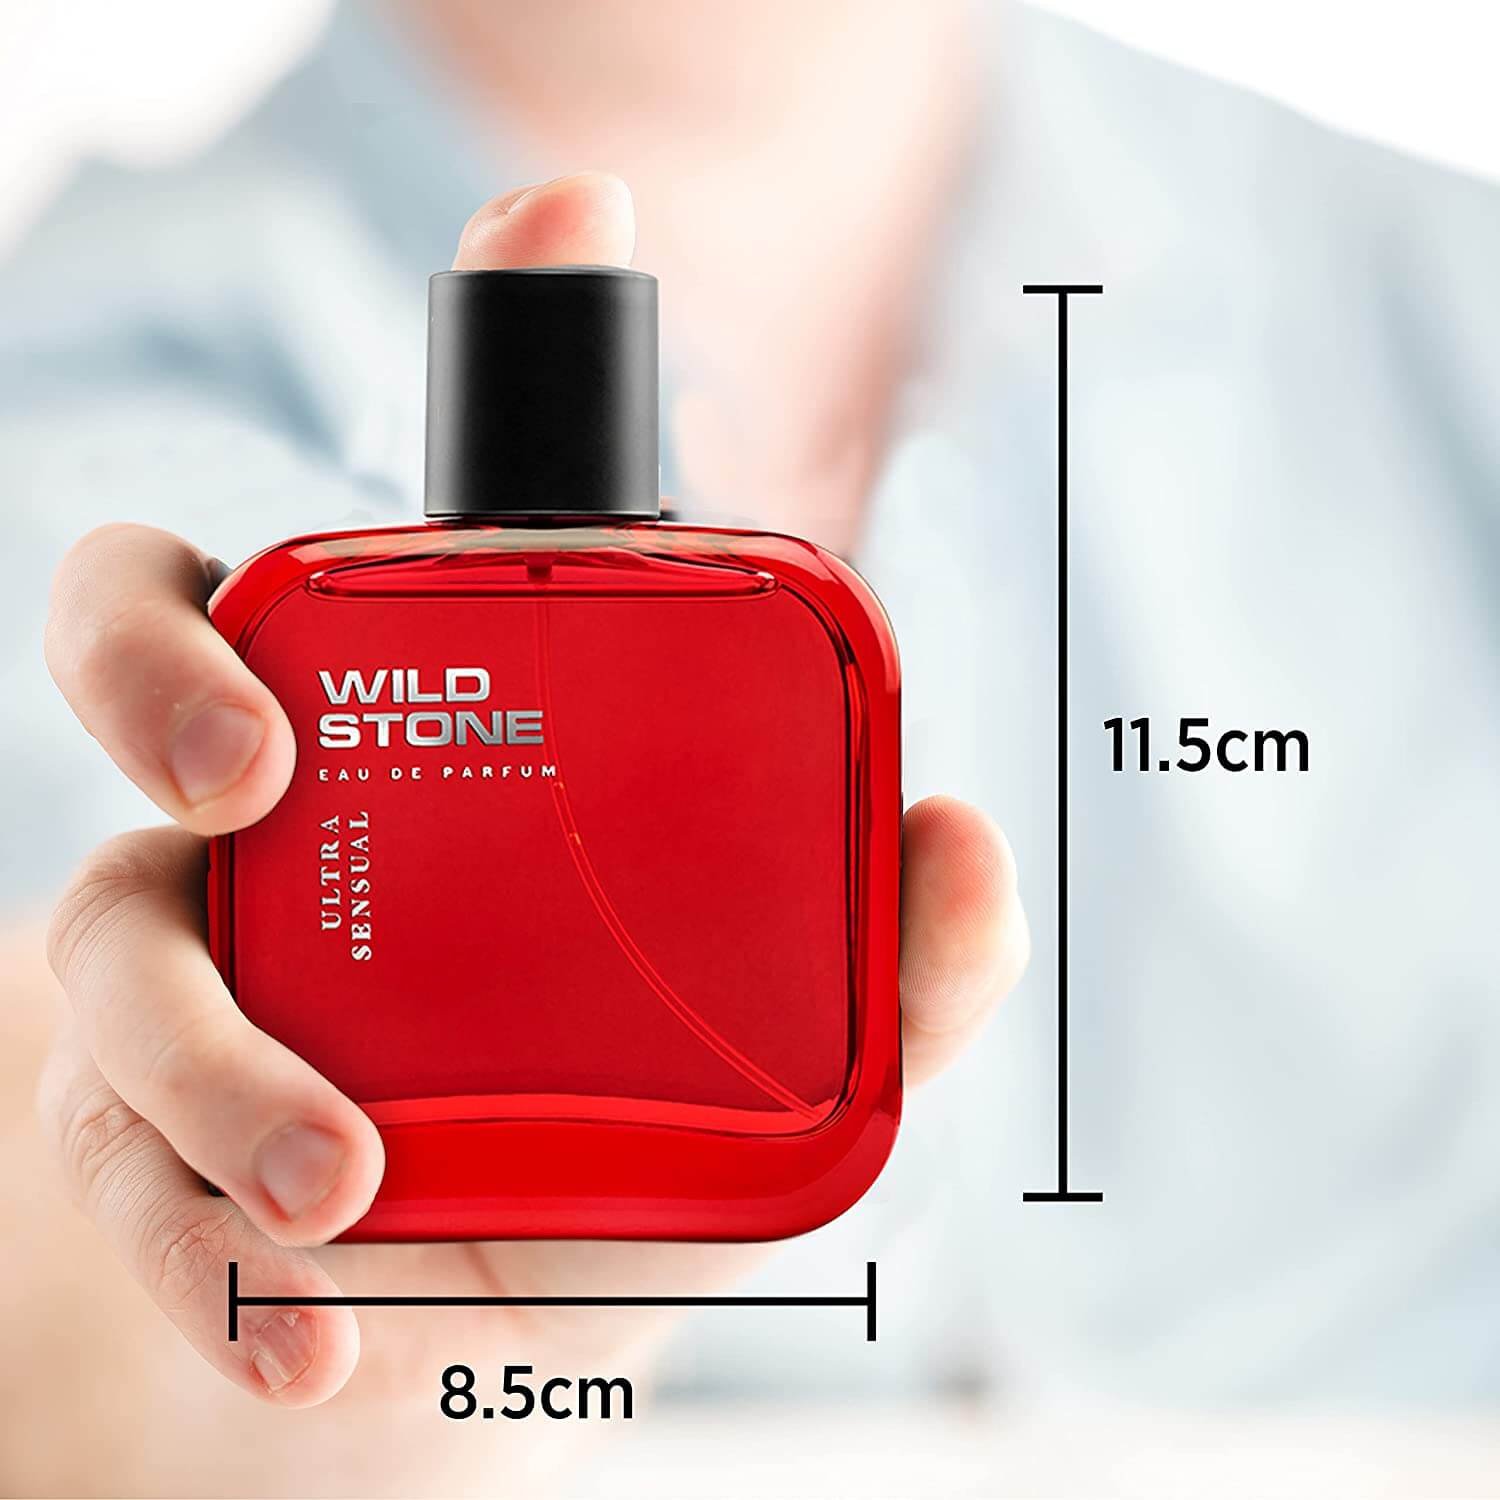 https://shoppingyatra.com/product_images/Wild Stone Ultra Sensual Perfume Spray for Men, 100ml, A Sensory Treat for Casual Encounters, Aromatic Blend of Masculine Fragrances3.jpg